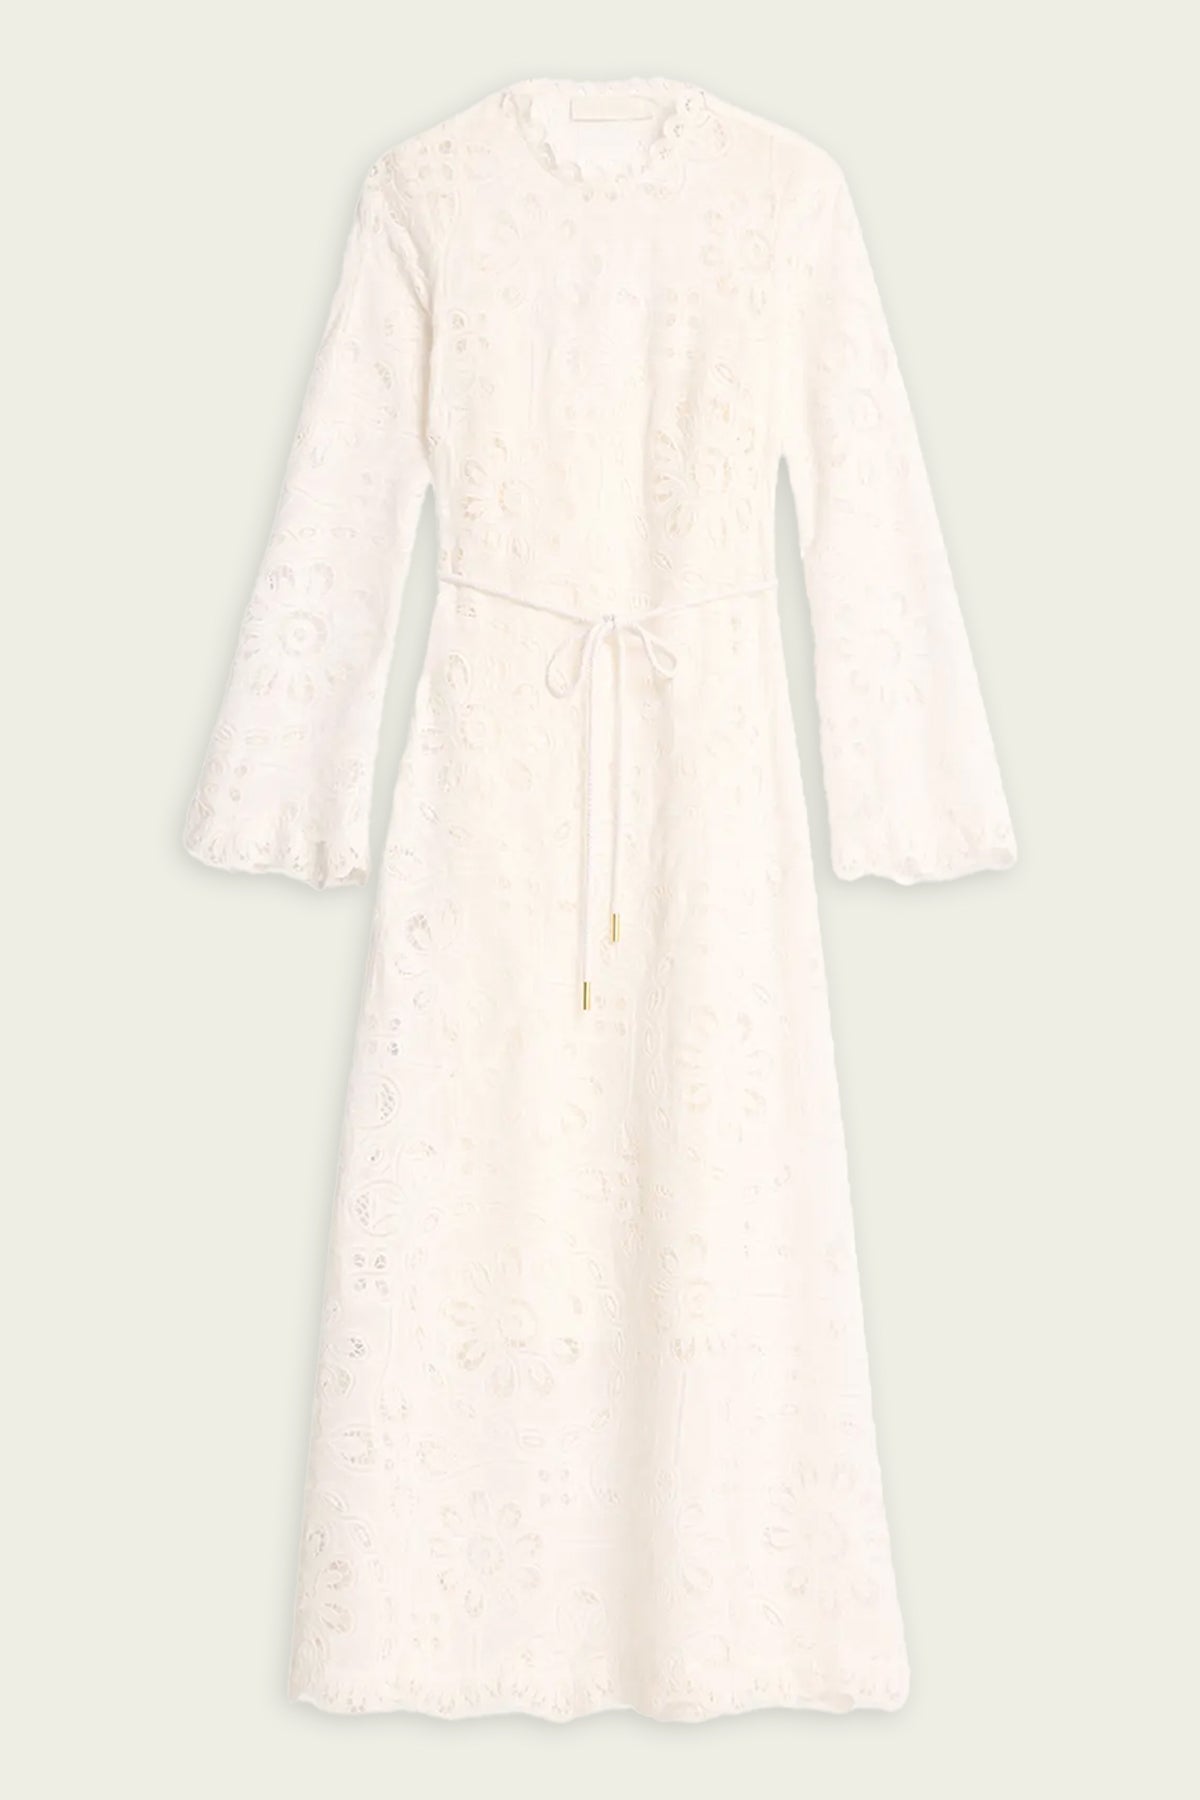 Ottie Embroidered Long Dress in Ivory - shop-olivia.com